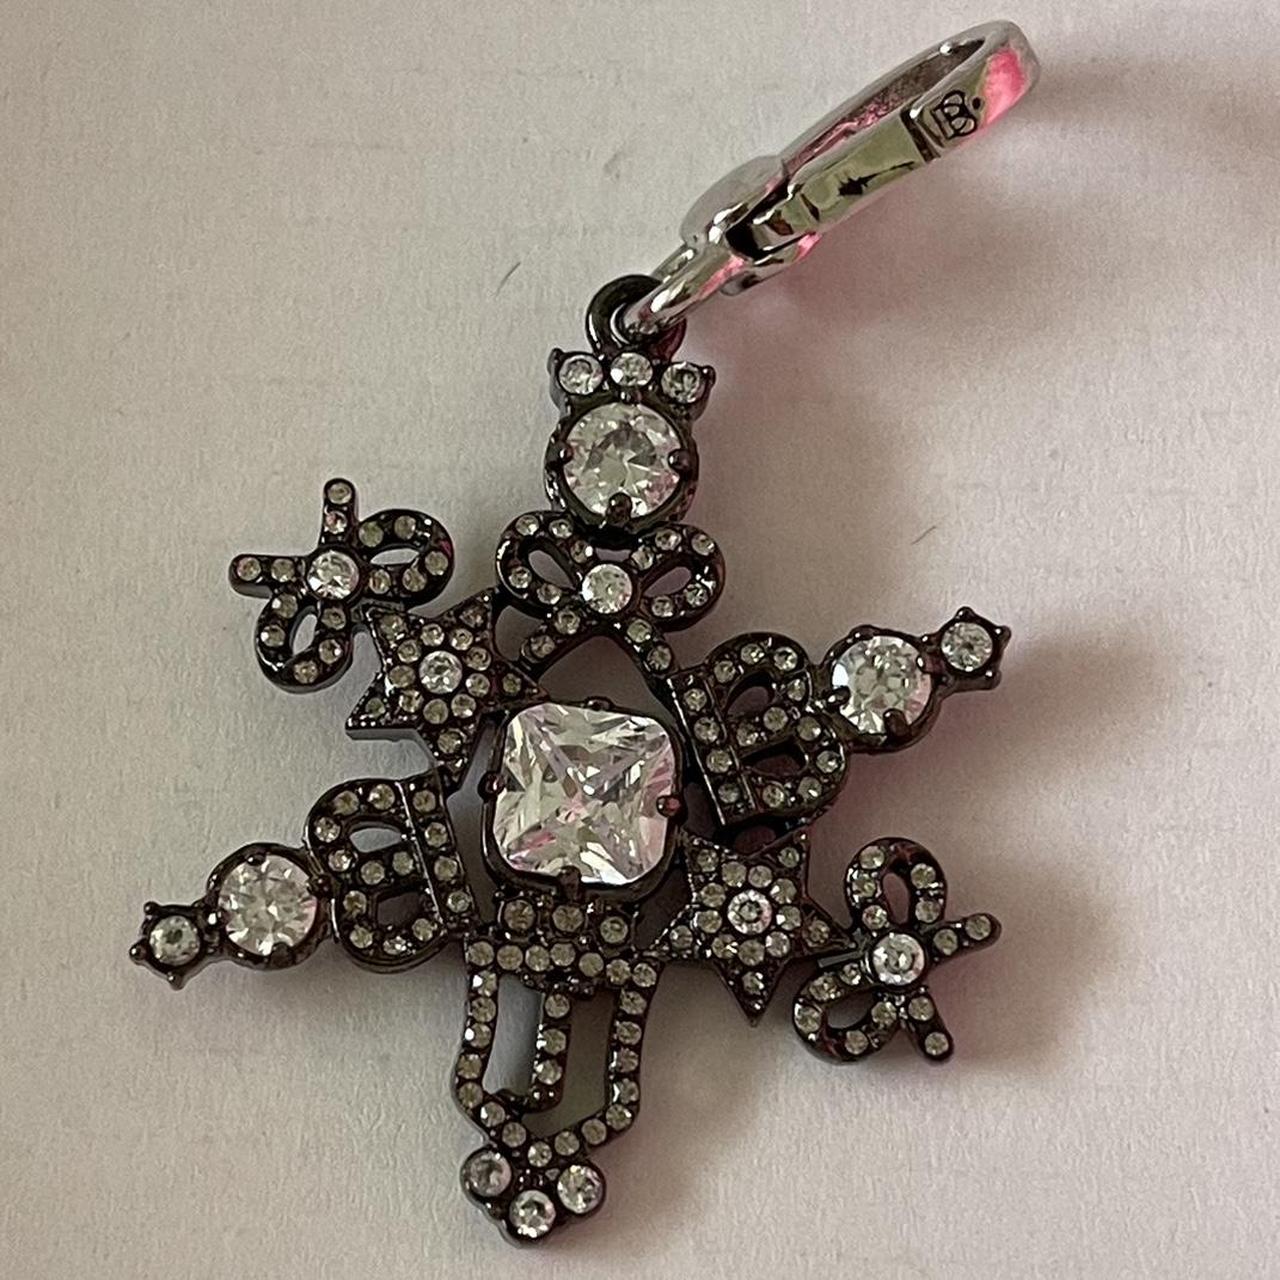 Juicy Couture charm bracelet featuring a crystal - Depop